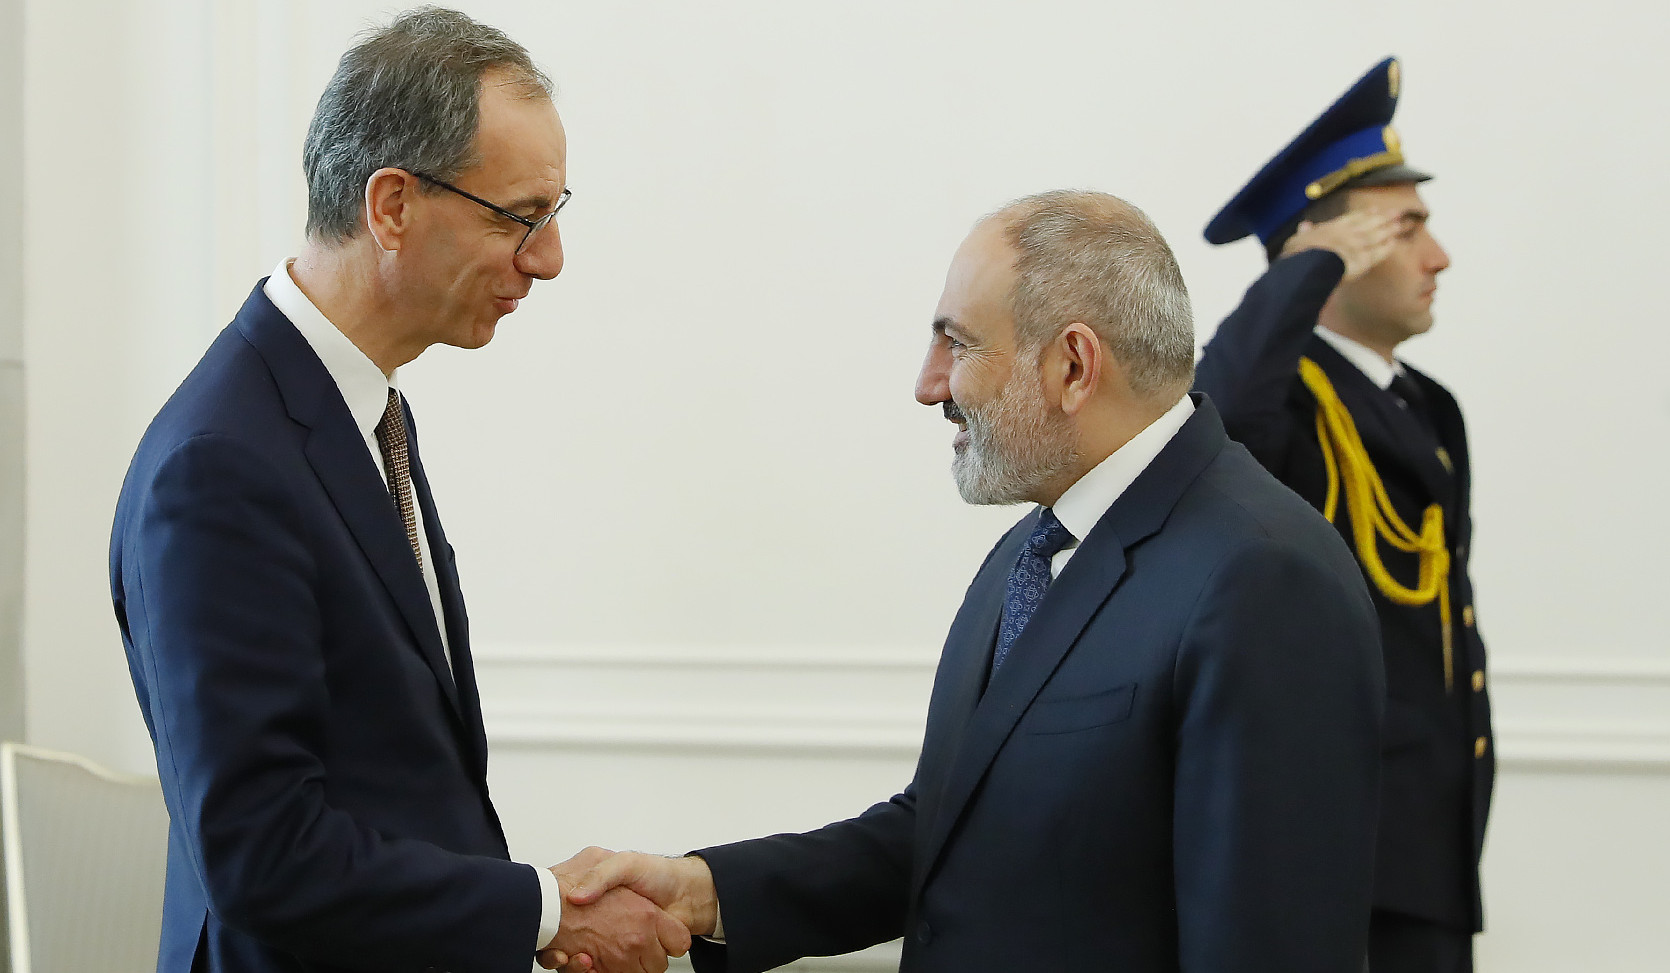 Prime Minister Pashinyan and Stefano Tomat referred to results of EU observation mission